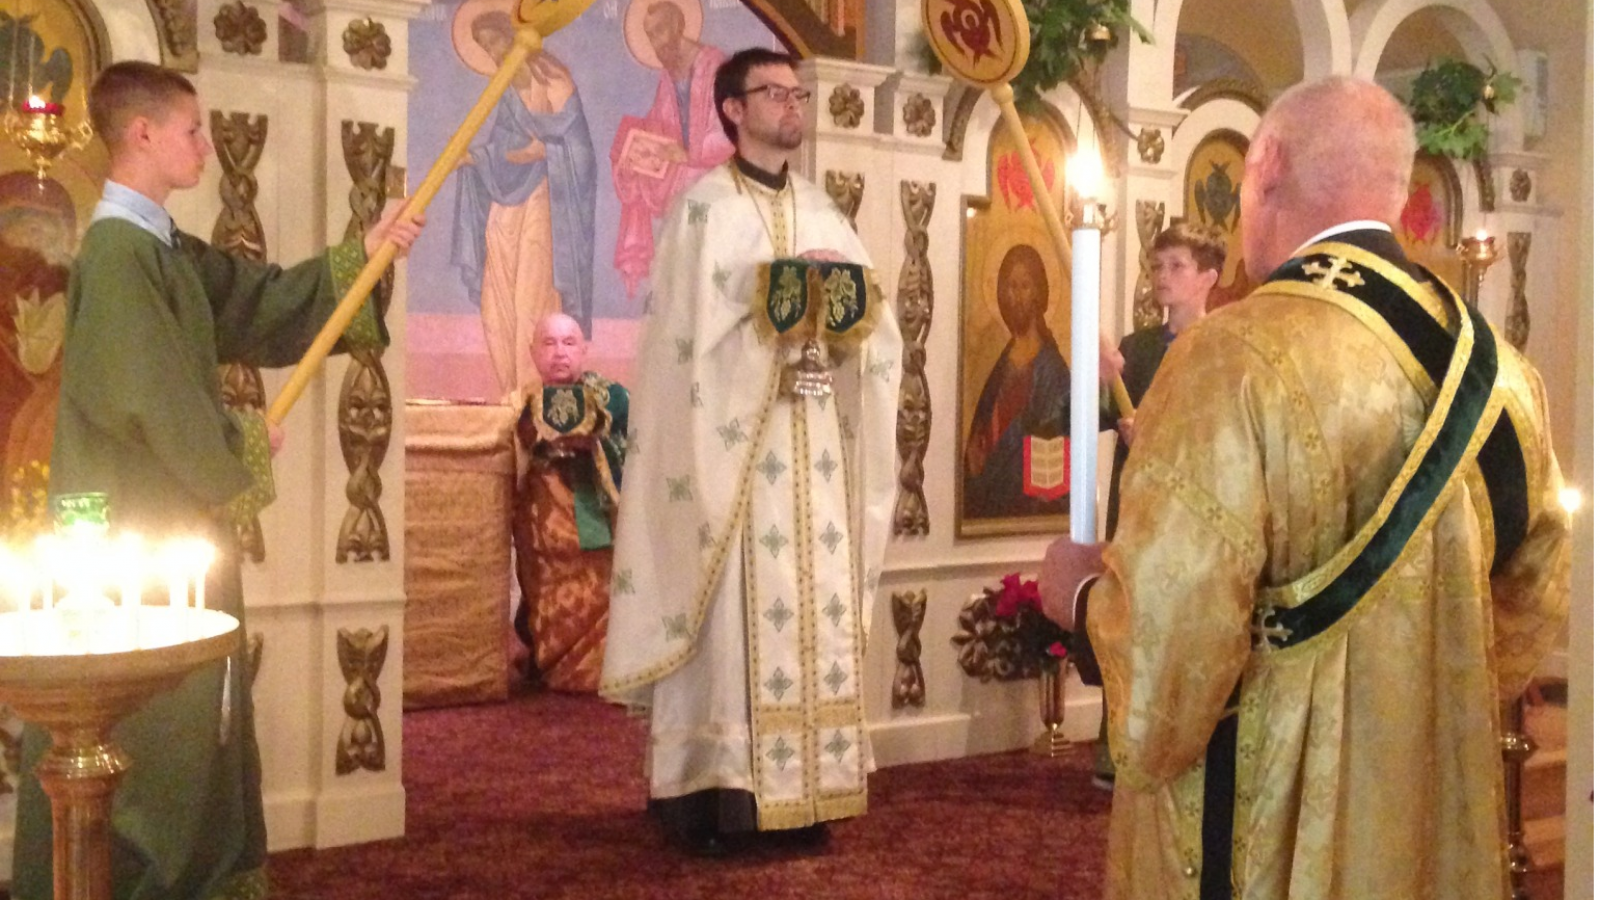 Father Mathew Leading Service at St. Gregory of Nyssa Orthodox Church